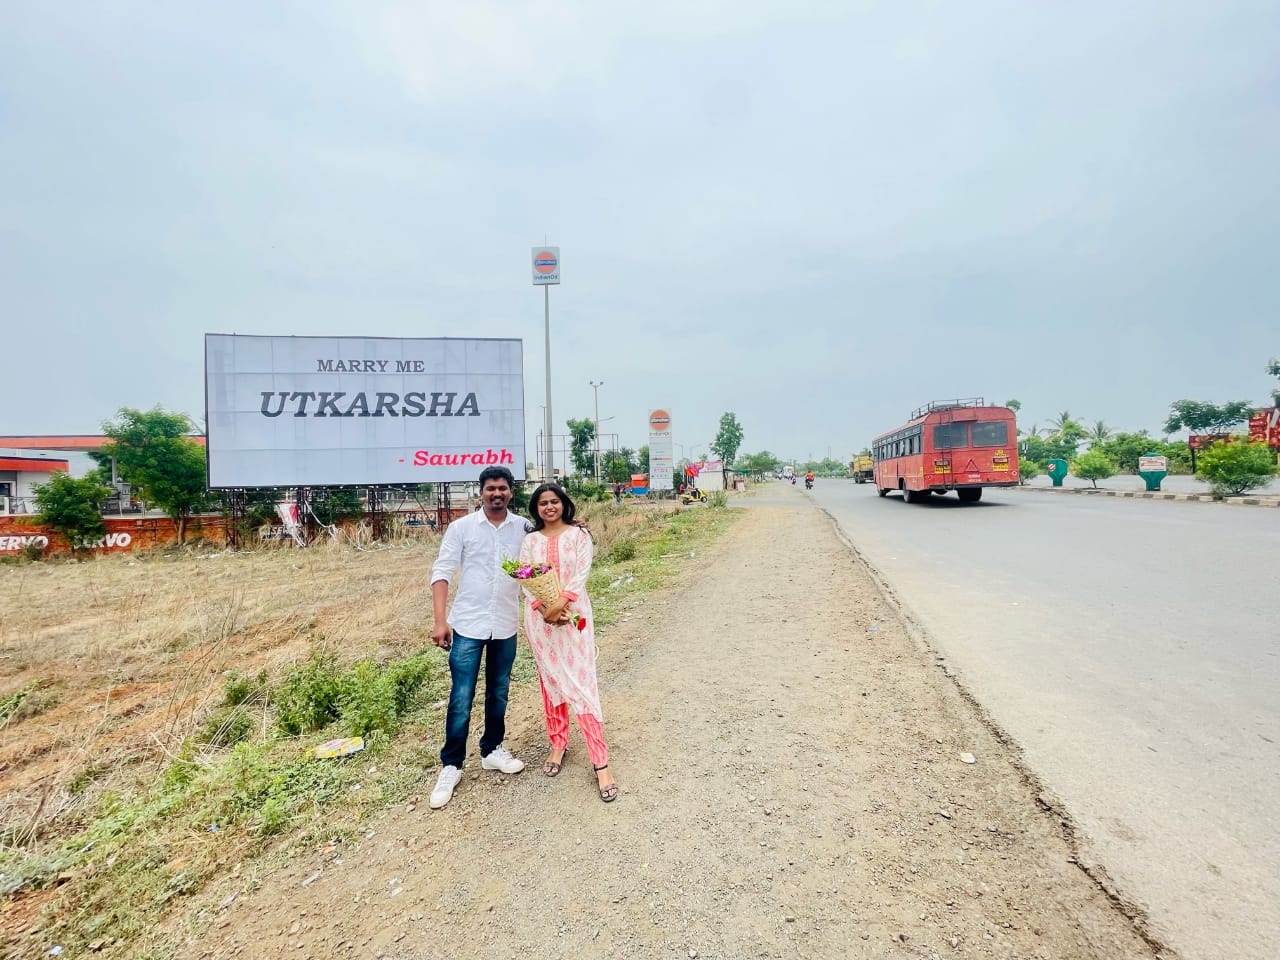 Youth proposed girl through large hoarding in in Kolhapur